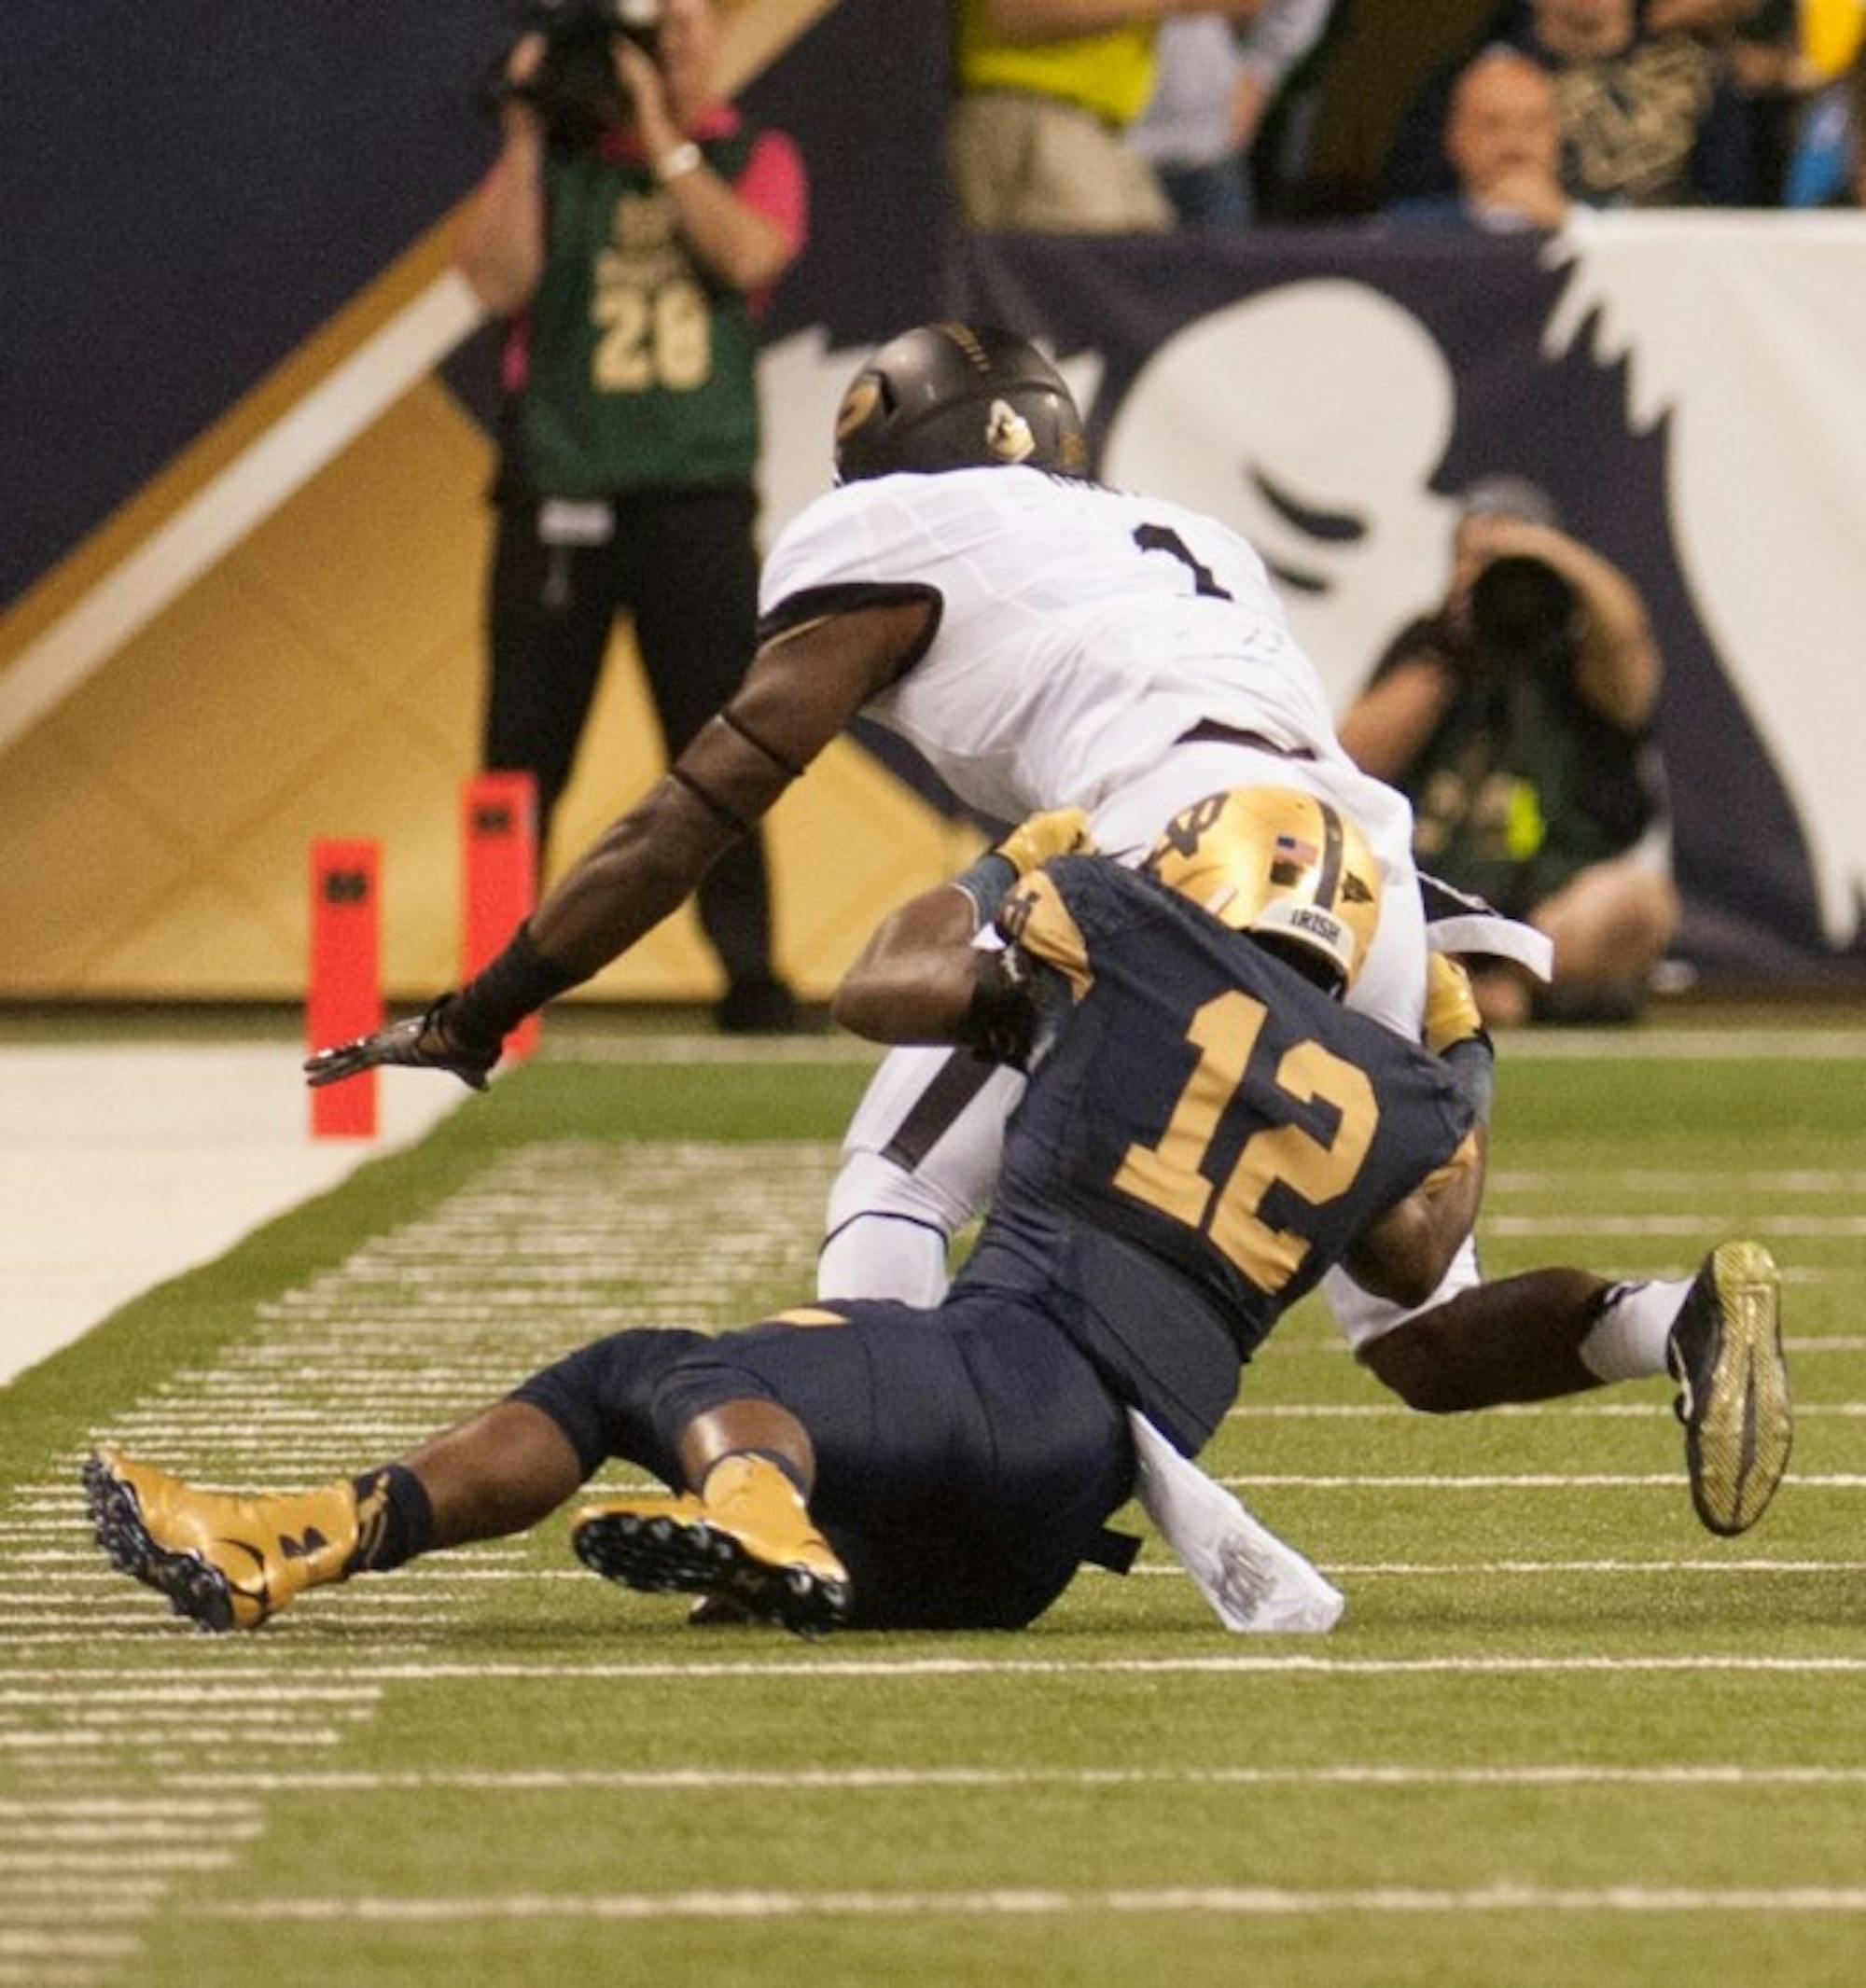 Junior cornerback Devin Butler makes a tackle in a 30-14 victory against Purdue on September 13 at Lucas Oil Stadium. The game was part of Notre Dame’s Shamrock Series.